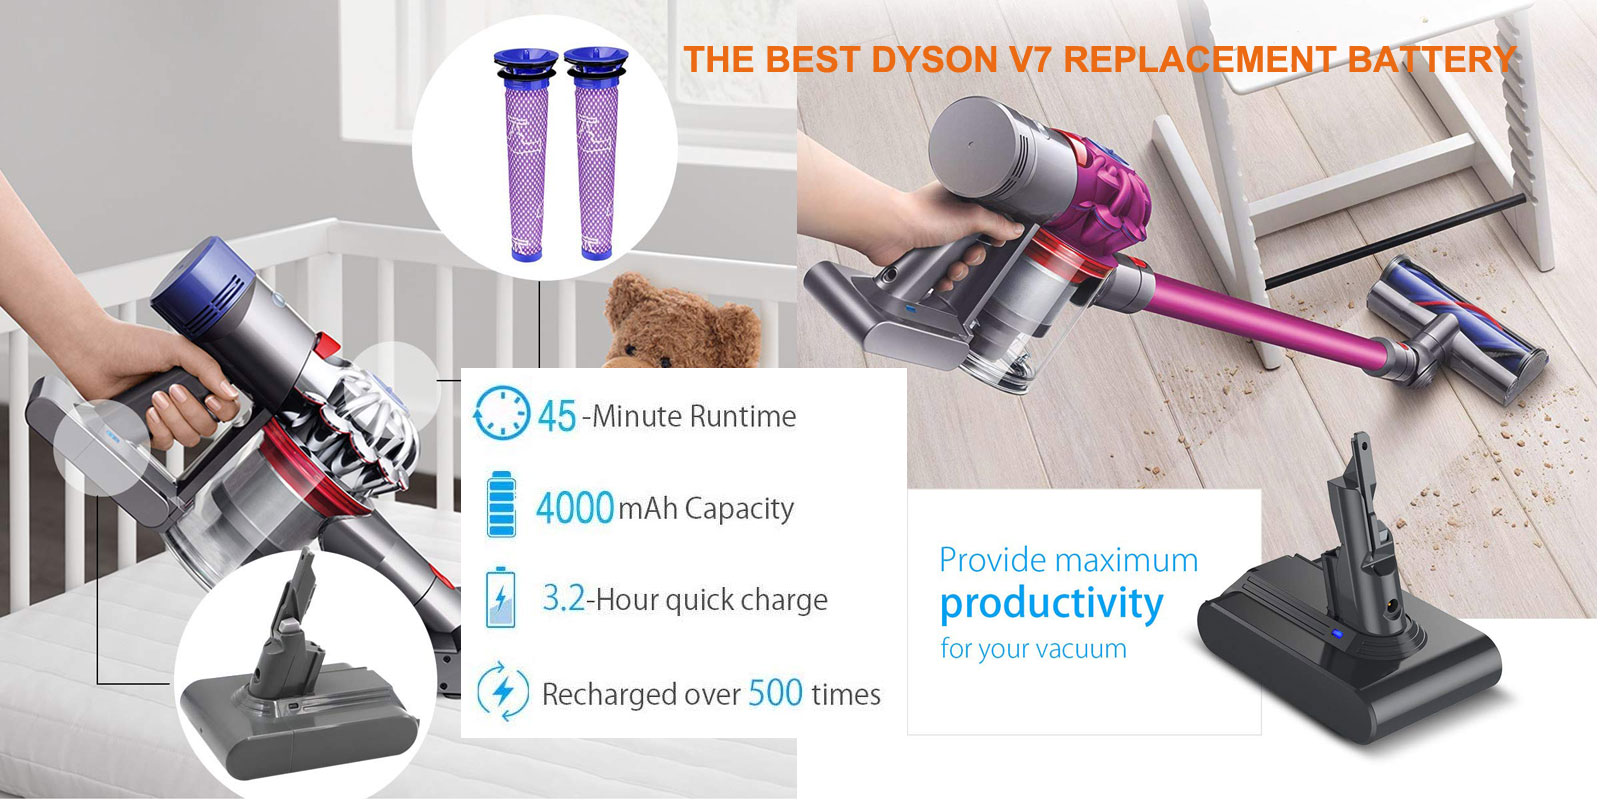 THE BEST DYSON V7 REPLACEMENT BATTERY